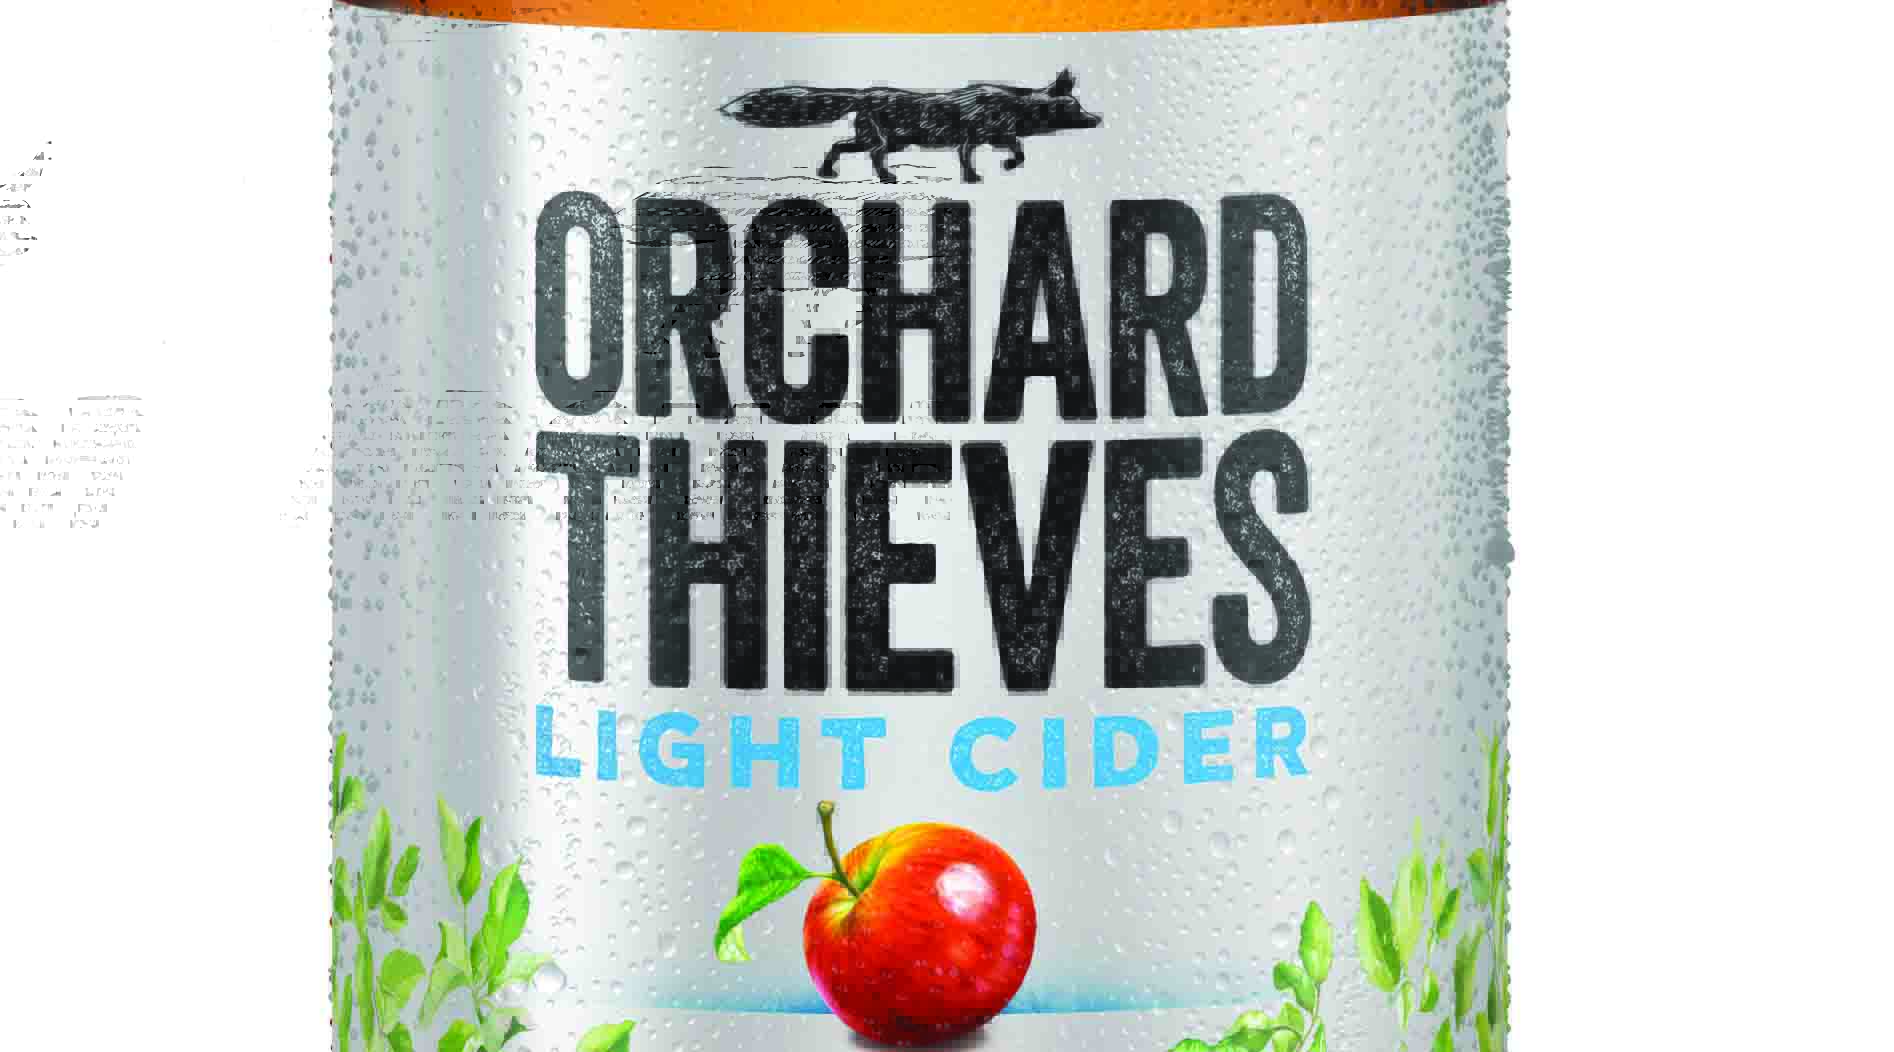 Orchard Thieves Light boasts 33% less sugar than Orchard Thieves at just 28 calories per 100ml and an ABV of 4.5%.